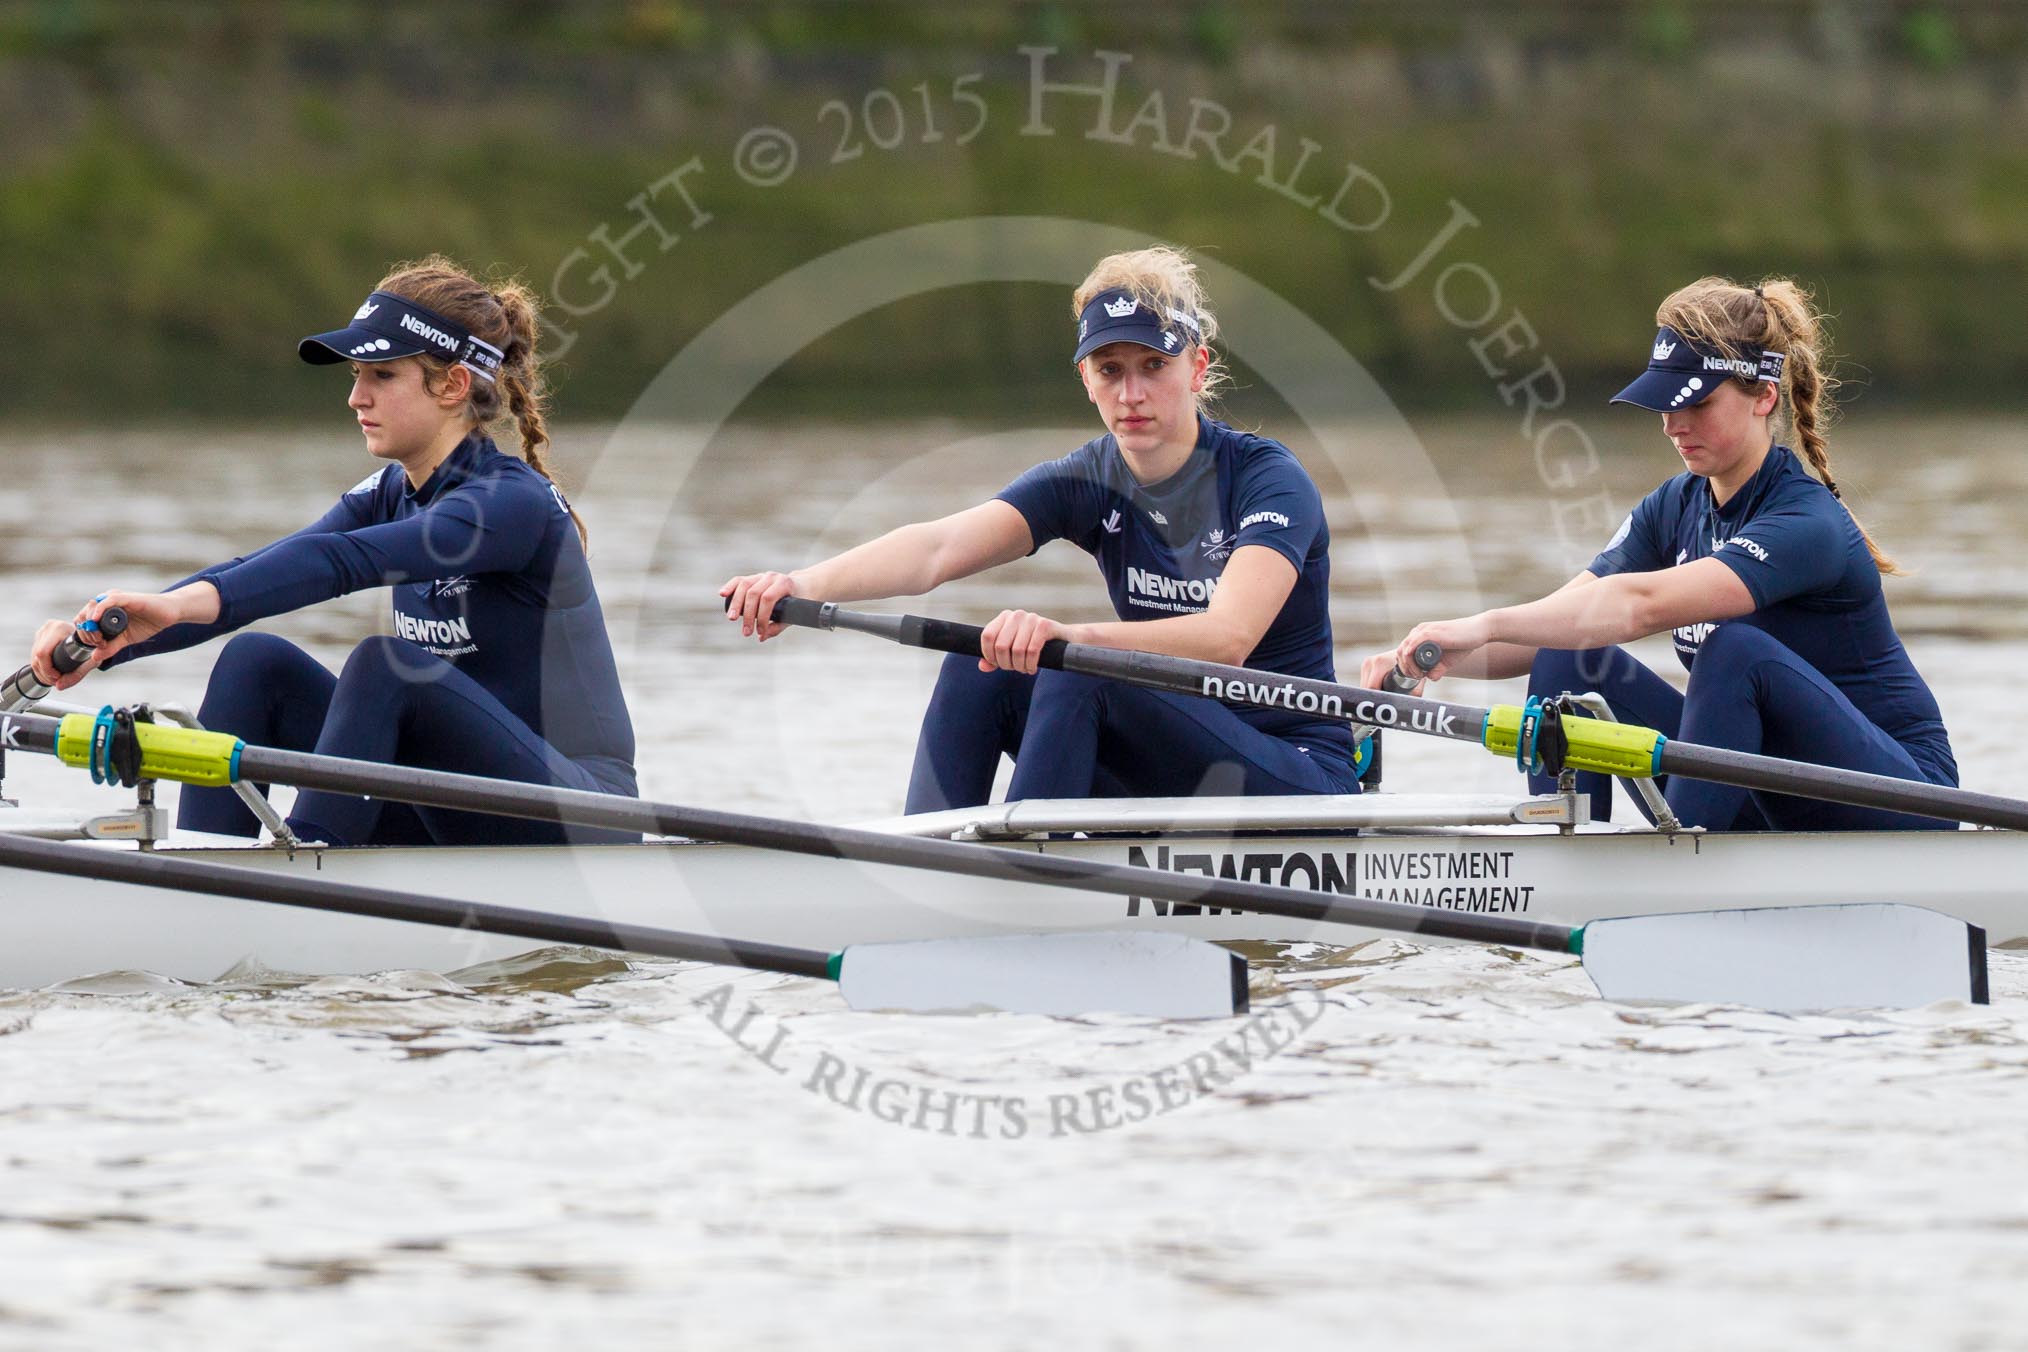 The Boat Race season 2016 - Women's Boat Race Trial Eights (OUWBC, Oxford): "Scylla" waiting for the start of the race, here 3-Elettra Ardissino, 2-Merel Lefferts, bow-Issy Dodds.
River Thames between Putney Bridge and Mortlake,
London SW15,

United Kingdom,
on 10 December 2015 at 12:17, image #129